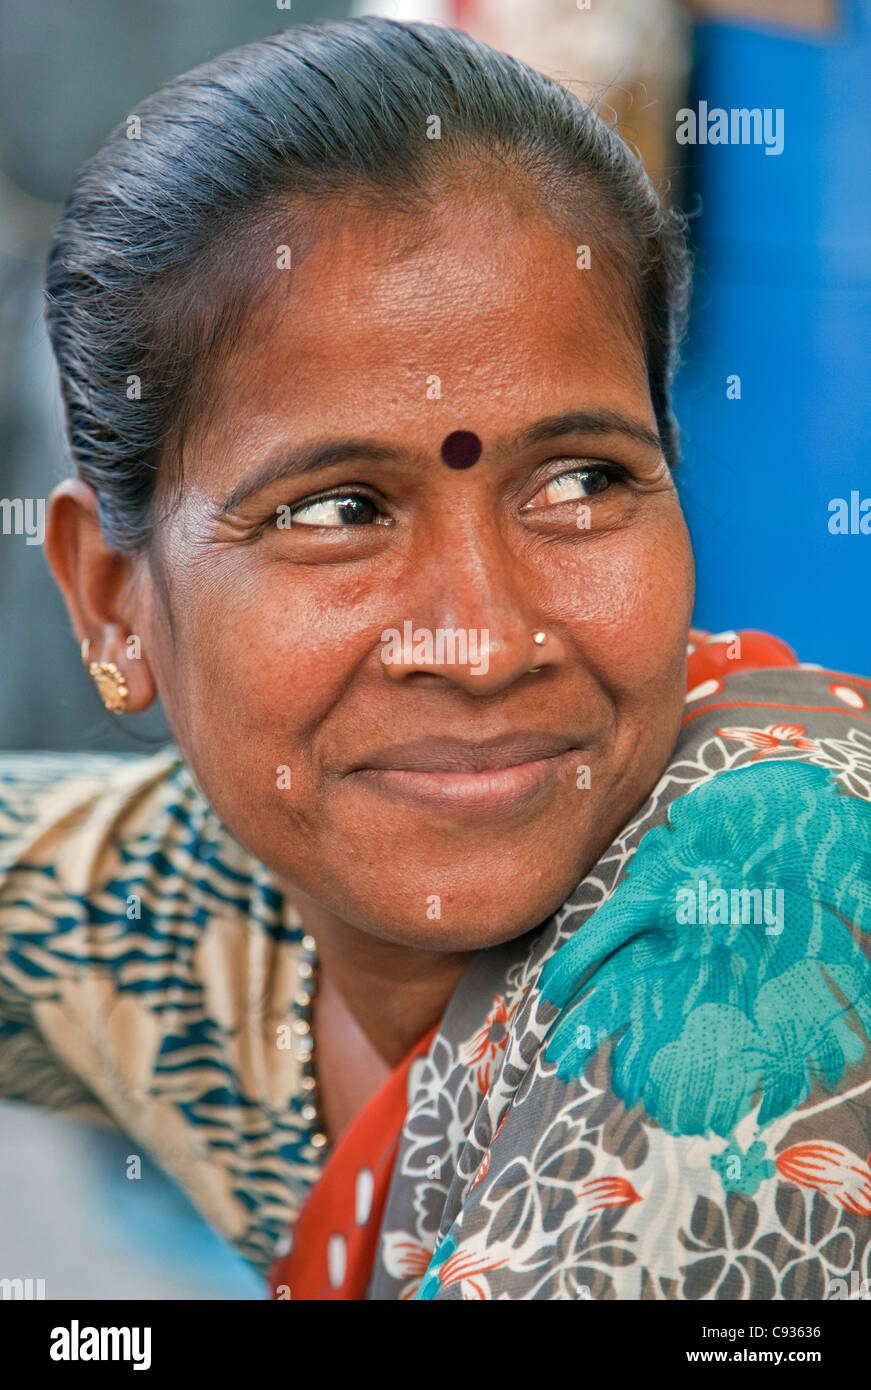 A happy woman at the Dakshineswar Kali Temple on the outskirts of Kolkata. The temple was founded in 1855 by Rani Rashmani. Stock Photo